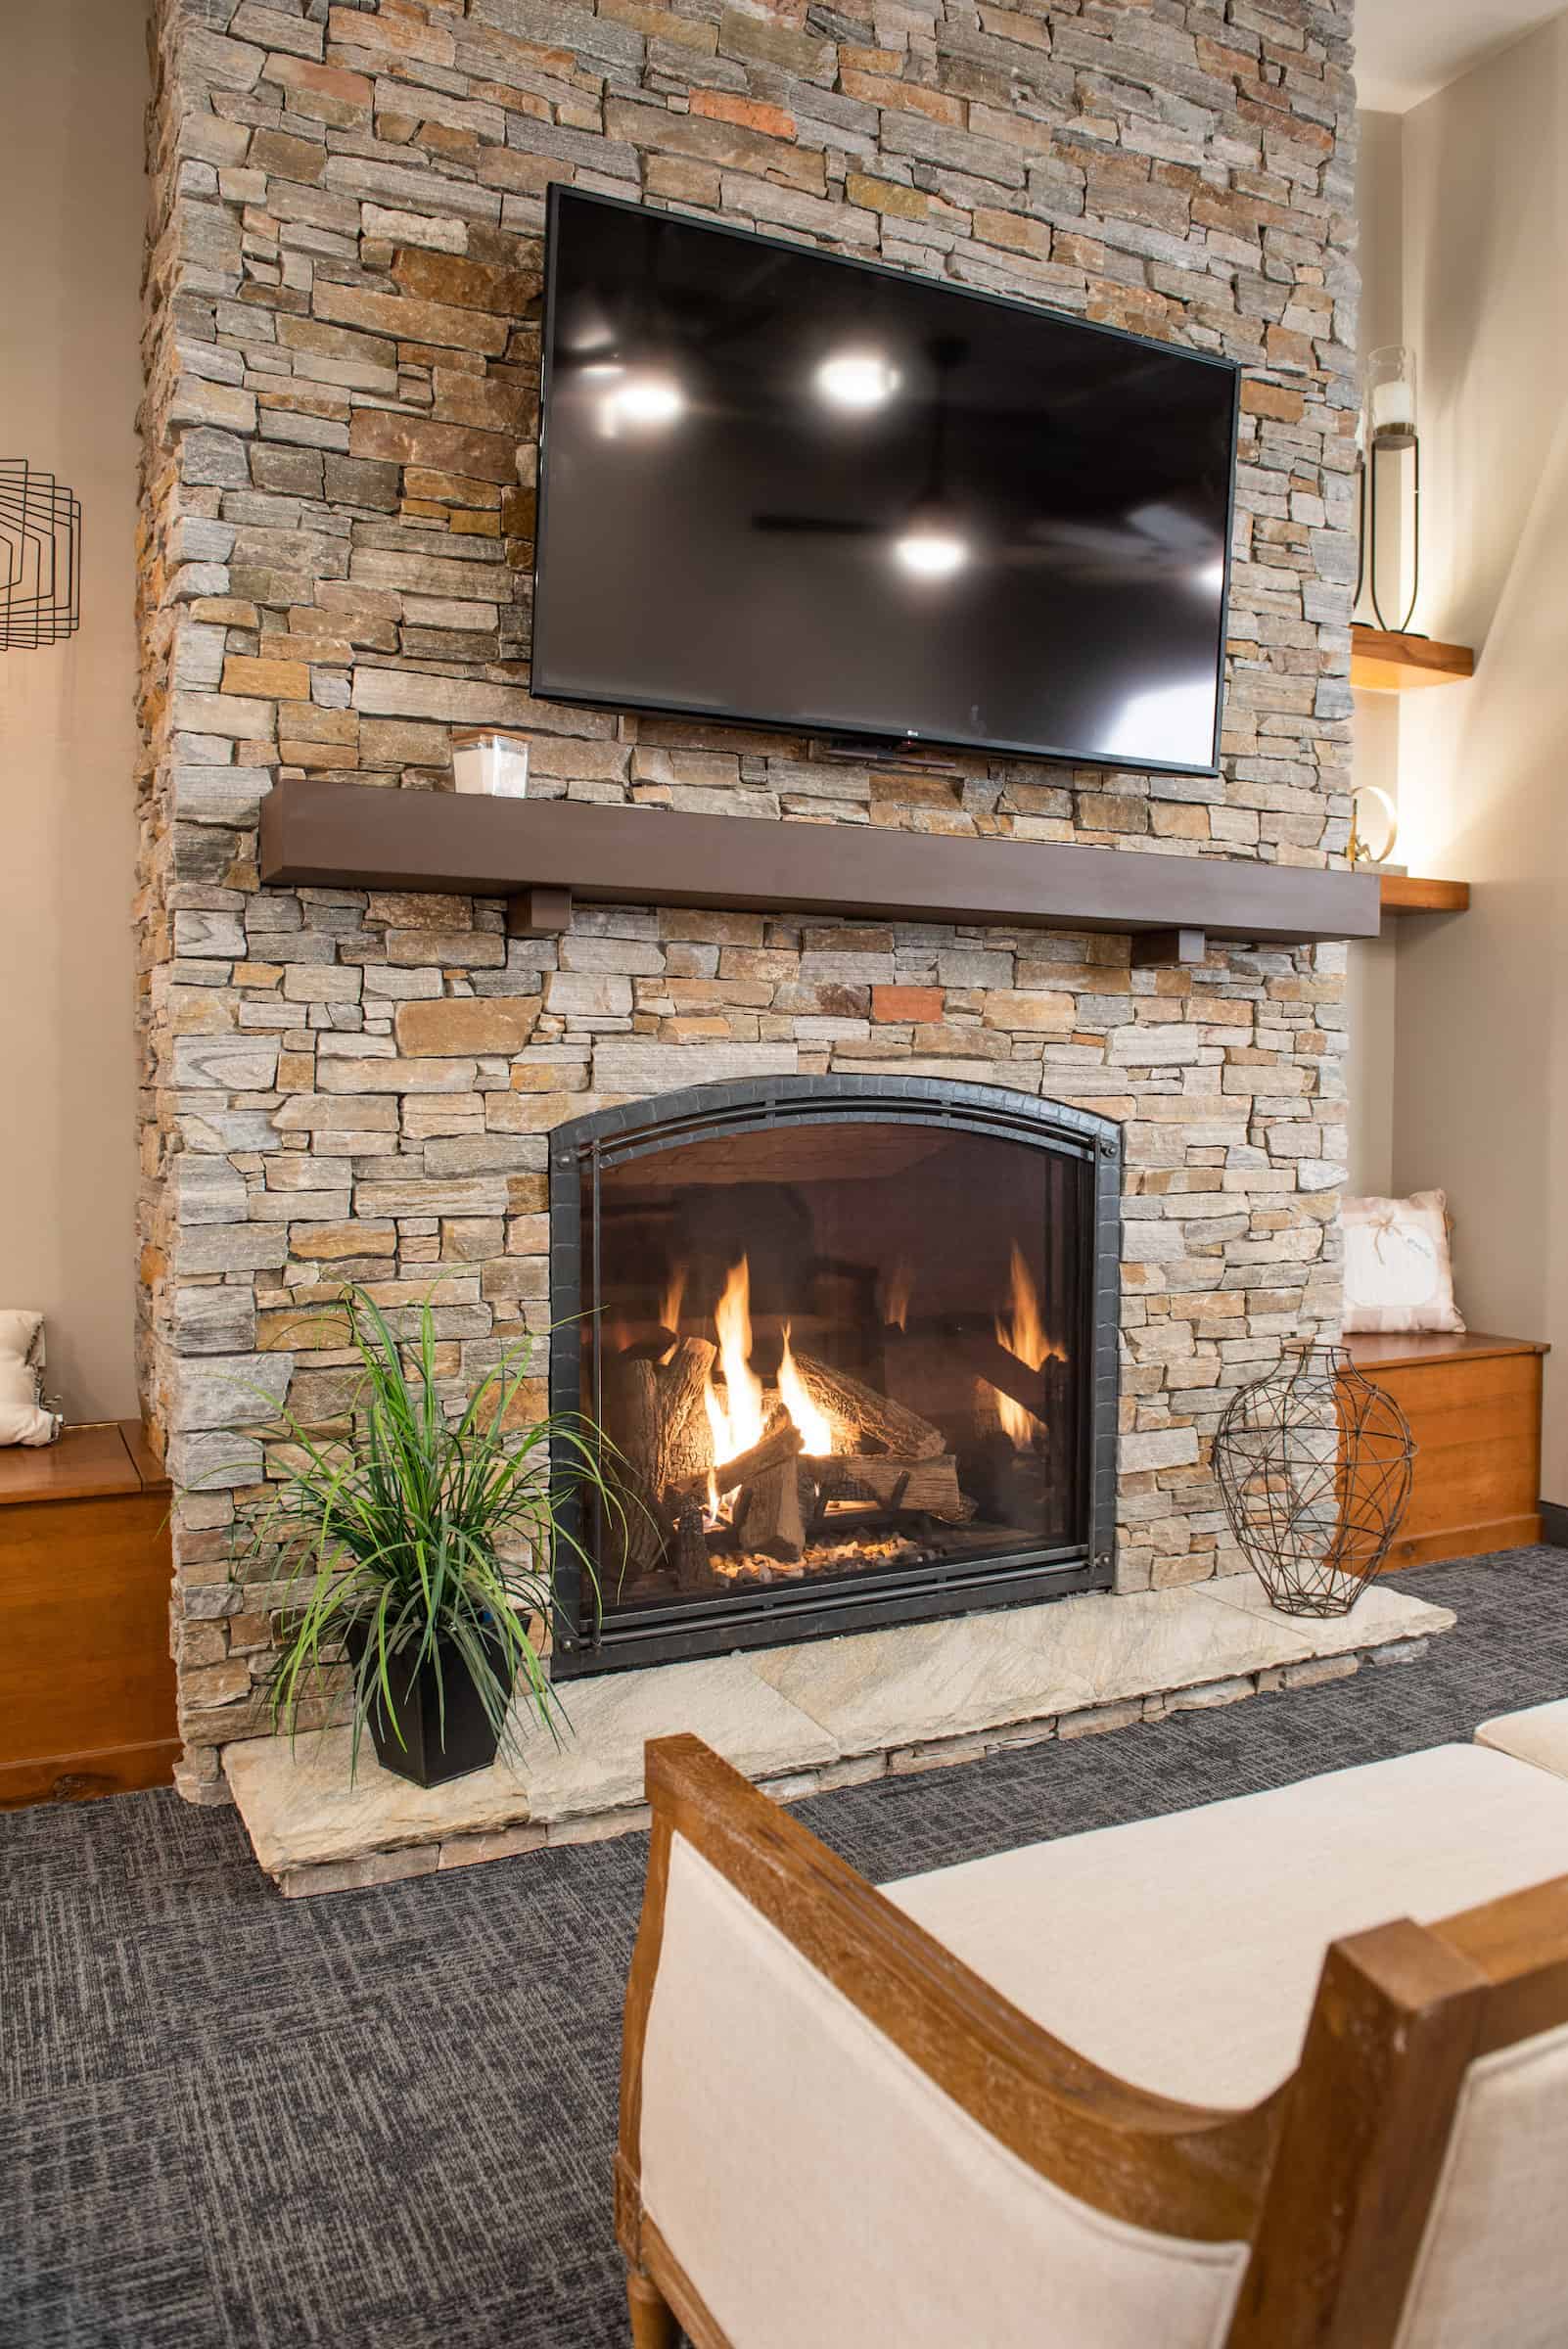 Revamping Your Fireplace Mantel With Floating Shelves